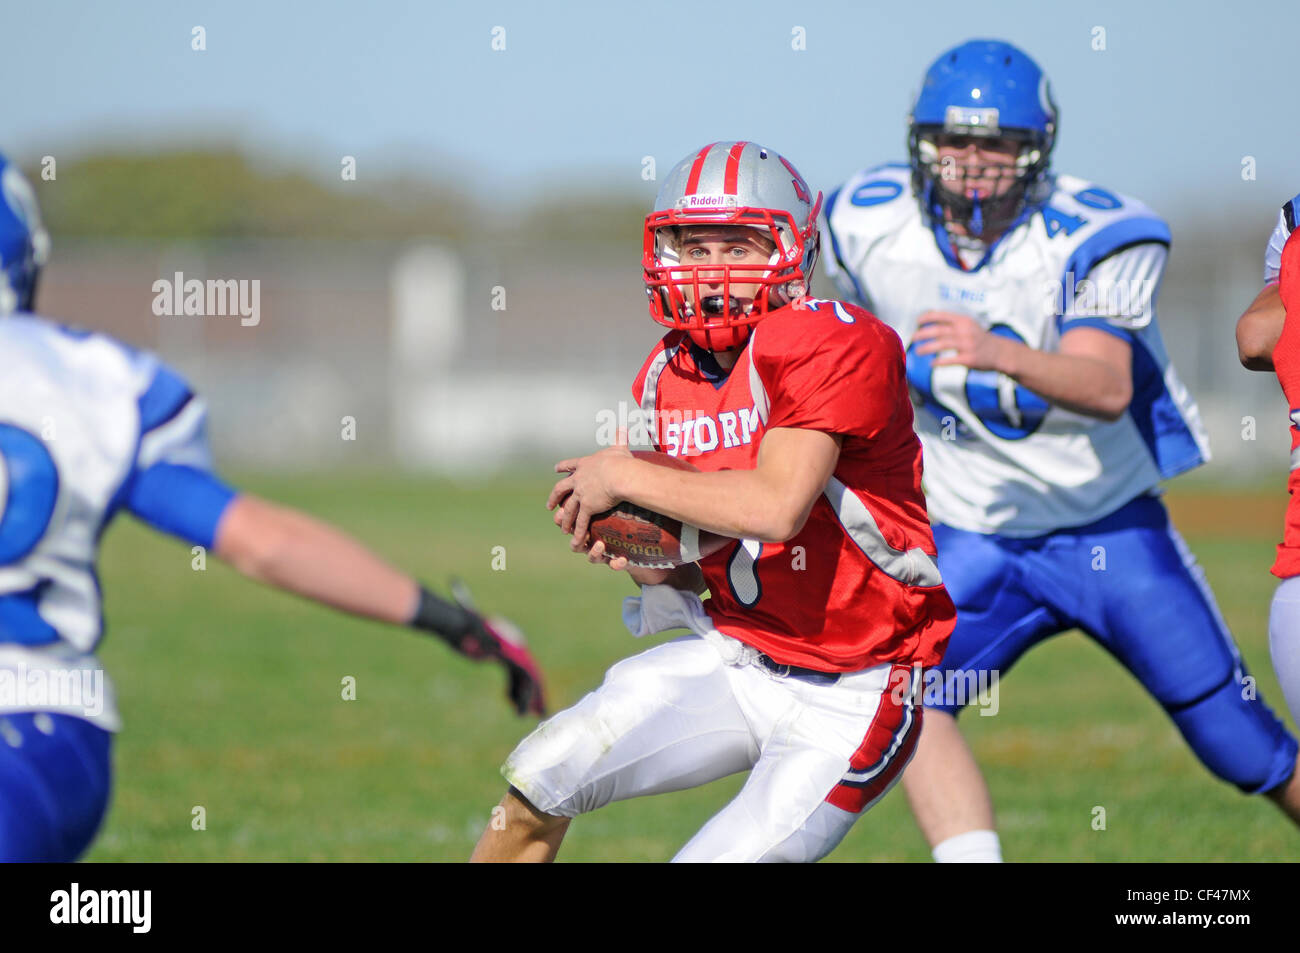 A quarterback looks for running room during a scramble from the pocket during a high school football game. USA. Stock Photo